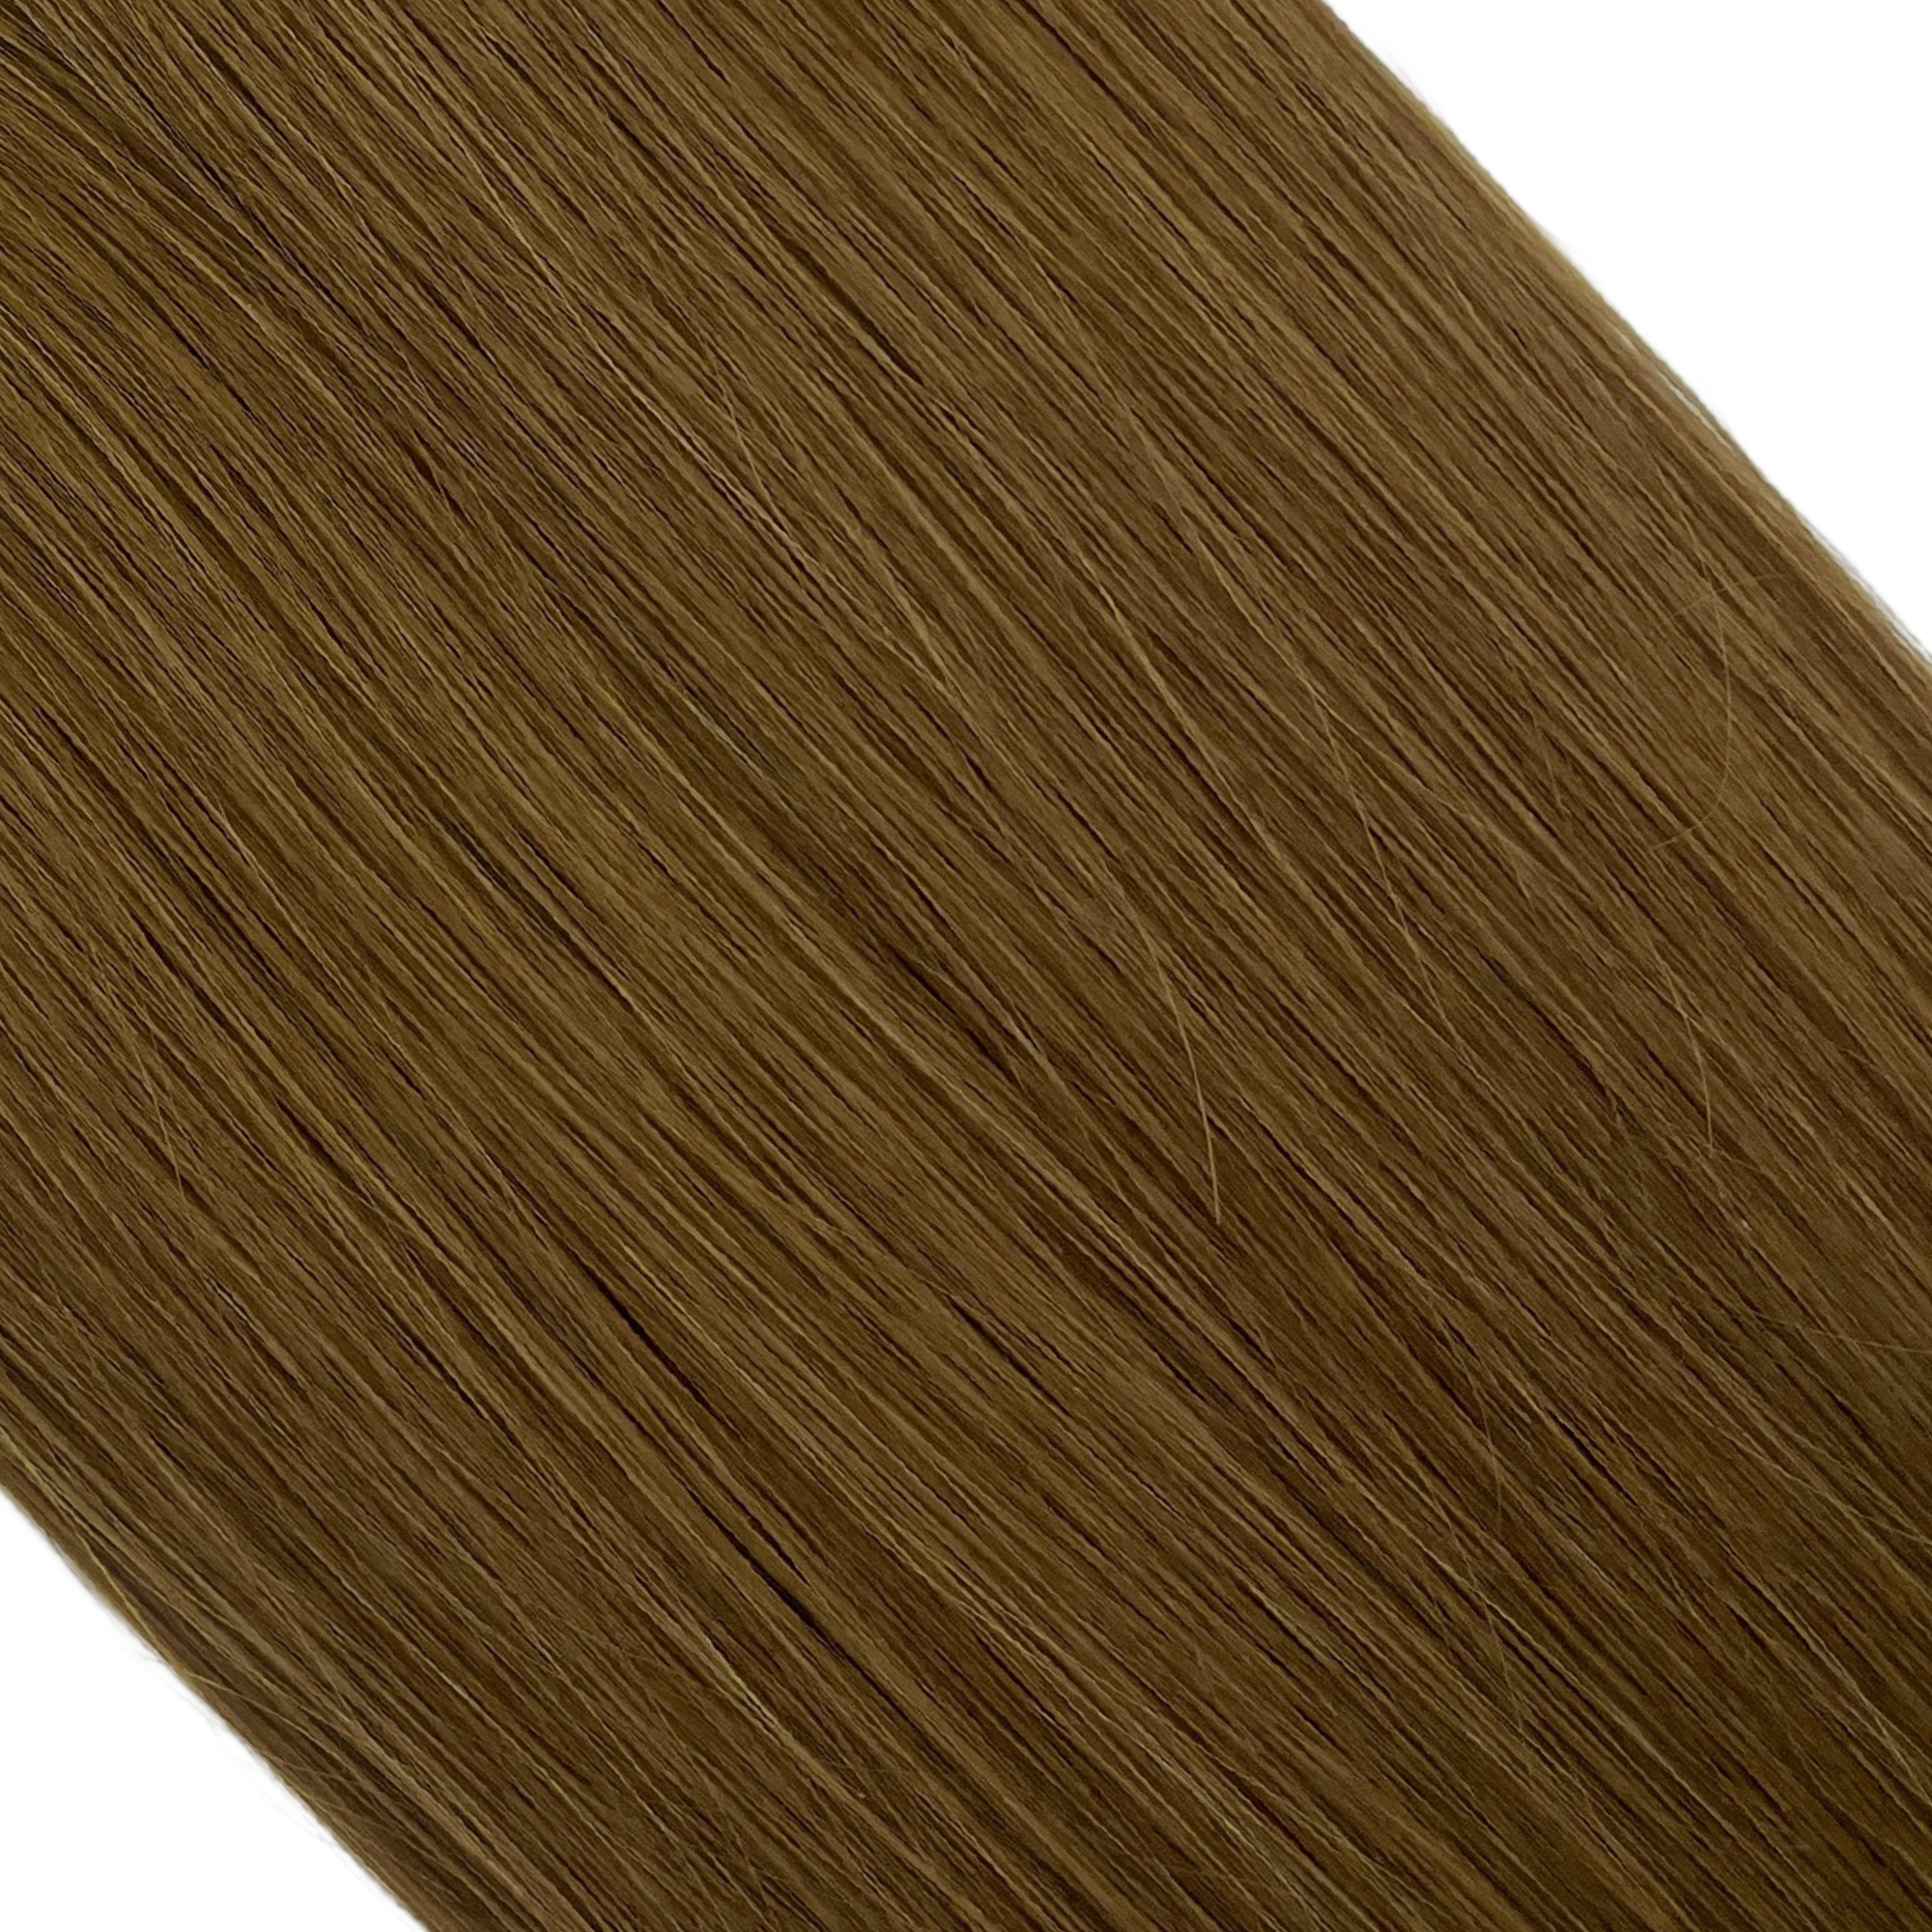 "hair rehab london 18" weft hair extensions shade swatch titled hollywood hottie"